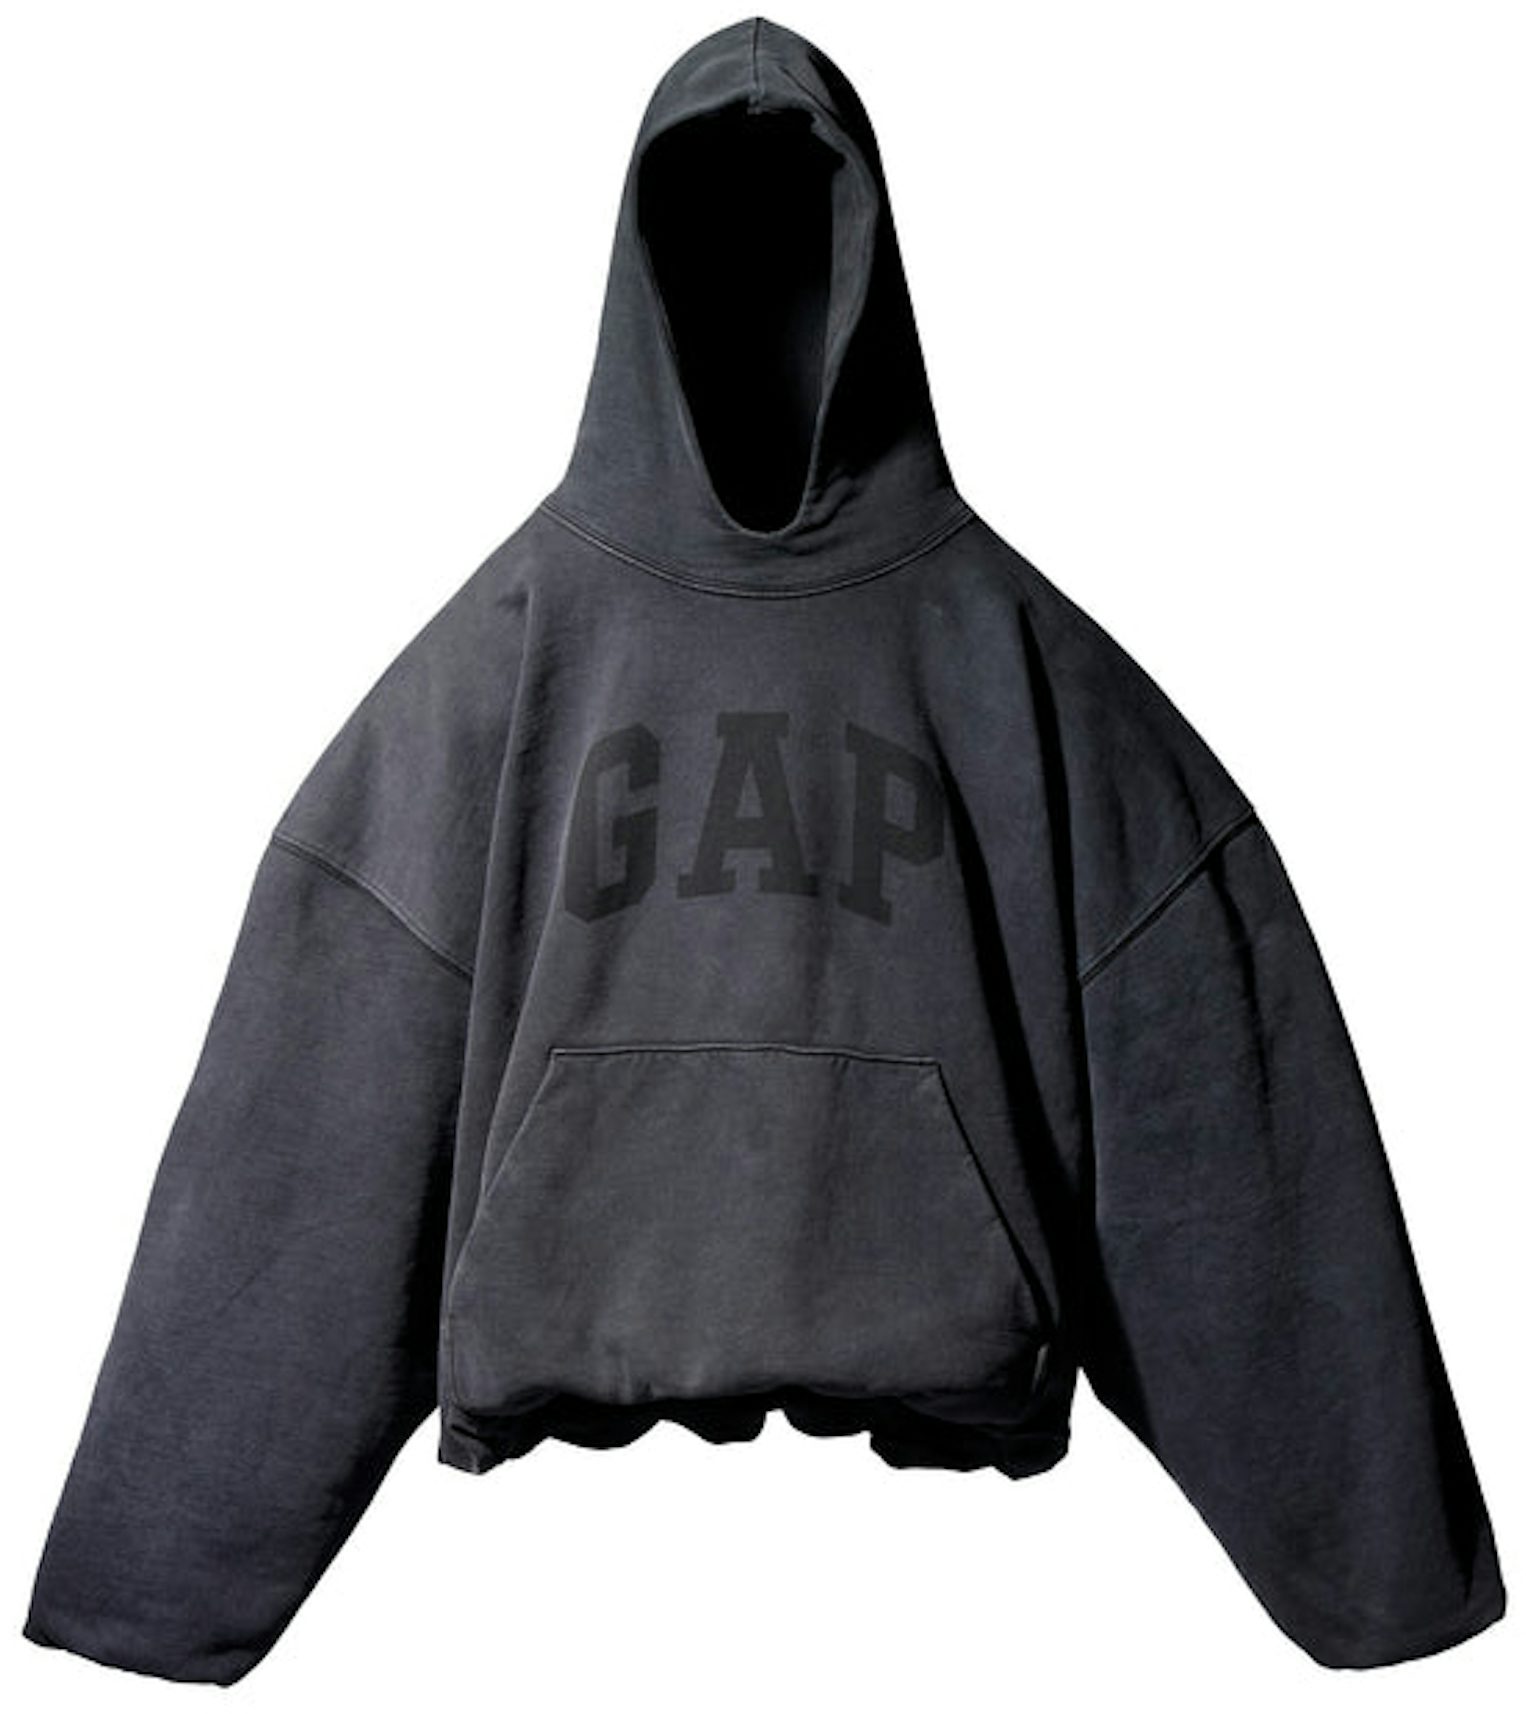 https://images.stockx.com/images/Yeezy-Gap-Engineered-by-Balenciaga-Dove-Hoodie-Black.jpg?fit=fill&bg=FFFFFF&w=1200&h=857&fm=jpg&auto=compress&dpr=2&trim=color&updated_at=1645628547&q=60